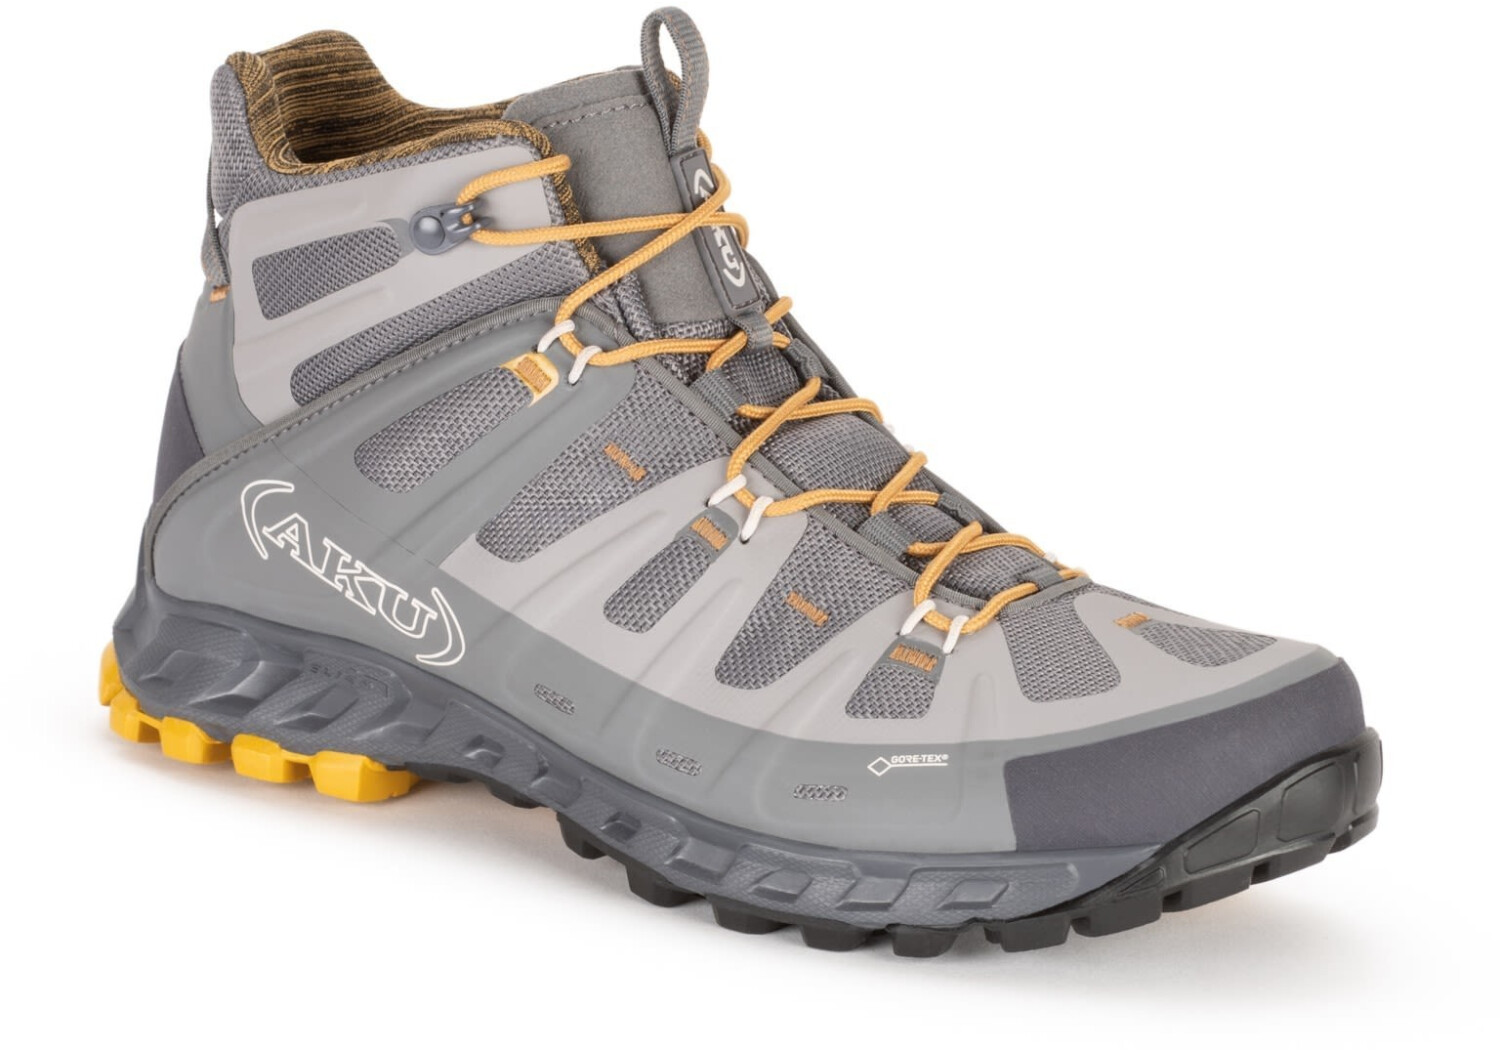 Buy Aku Selvatica Mid GTX from £120.71 (Today) – Best Deals on idealo.co.uk